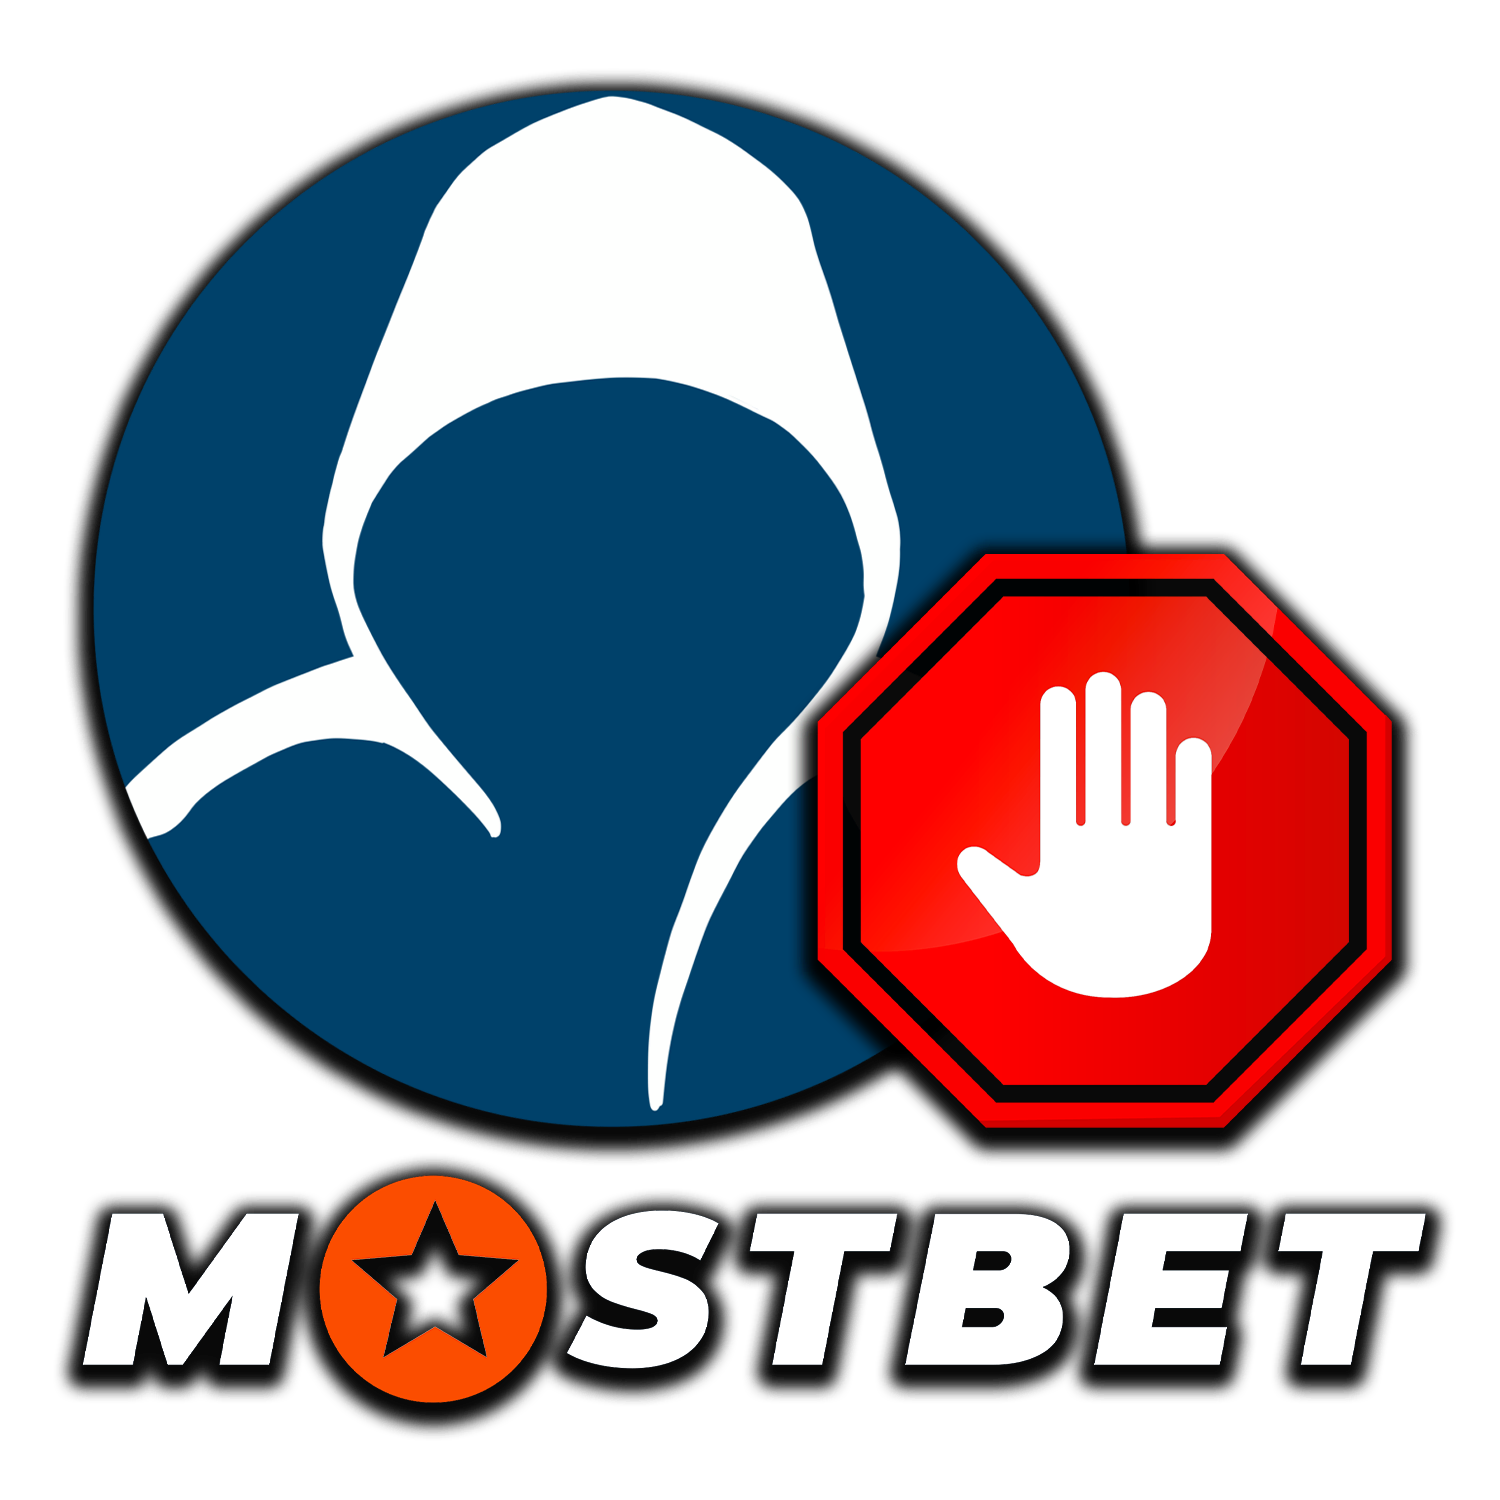 Anti-fraud policy and security in the Mostbet office.